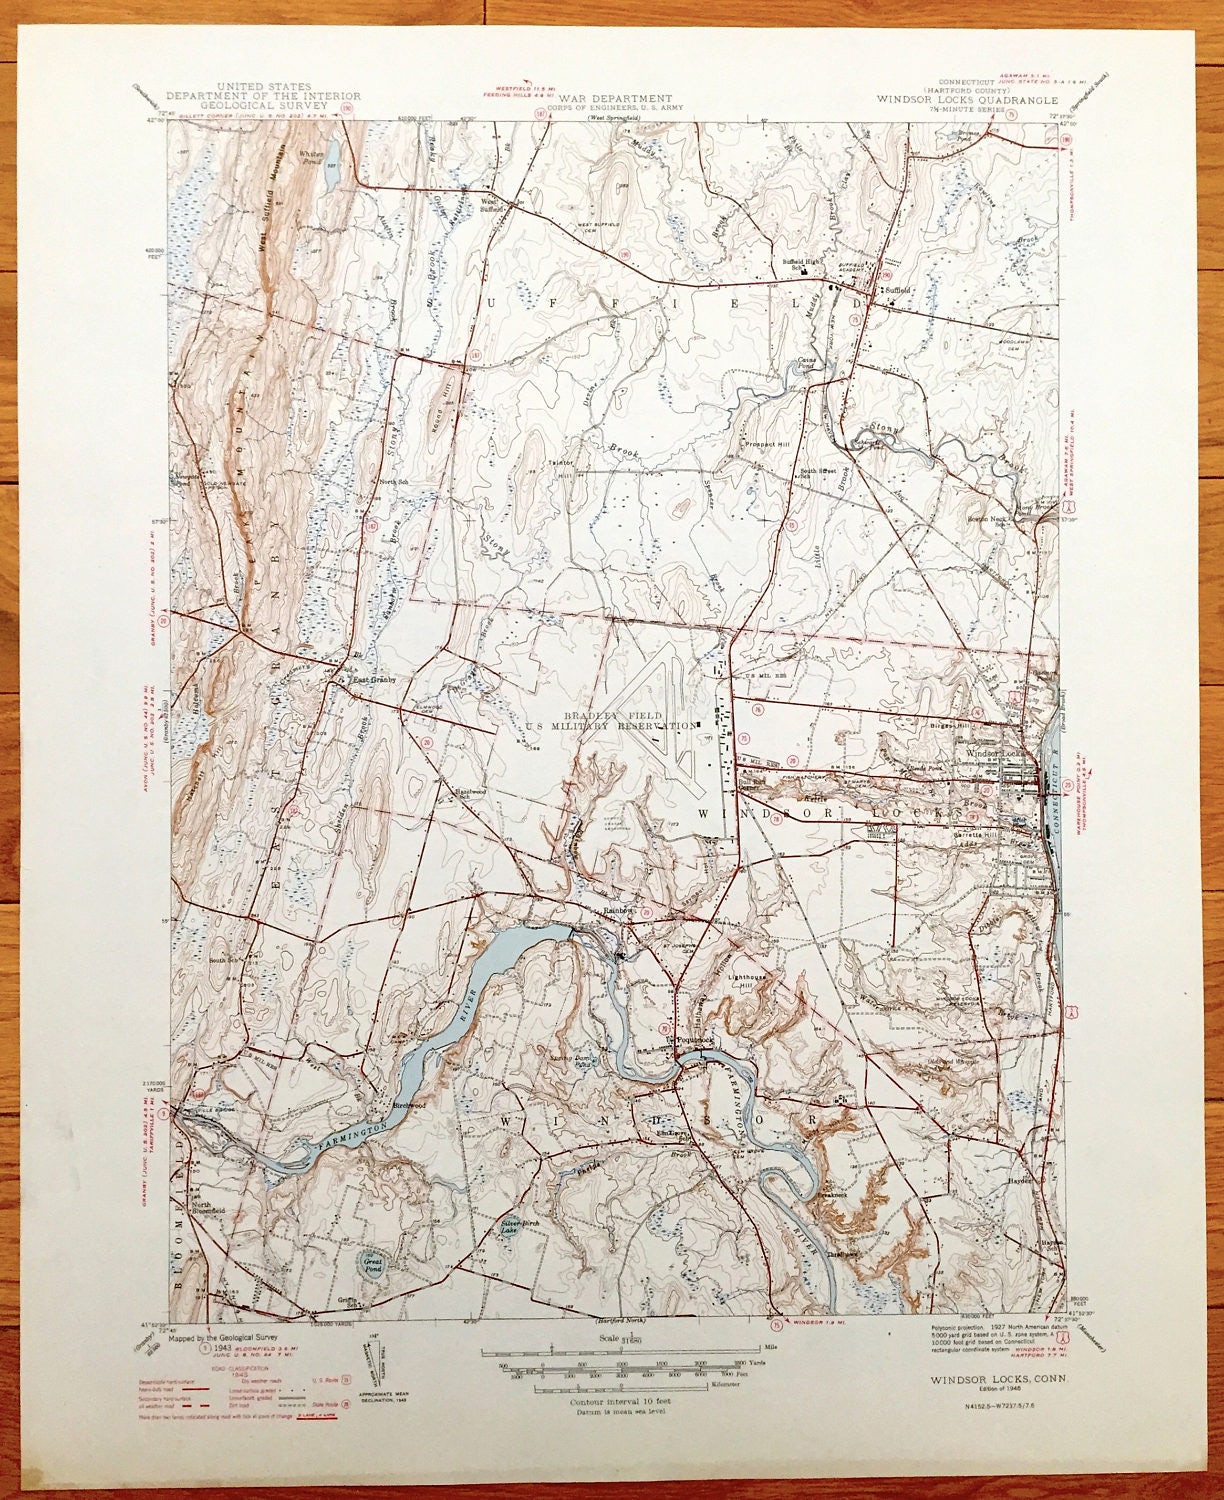 Antique Windsor Locks, Connecticut 1946 US Geological Survey Topographic Map – East Granby, Bloomfield, Suffield, Hayden, Hartford County CT